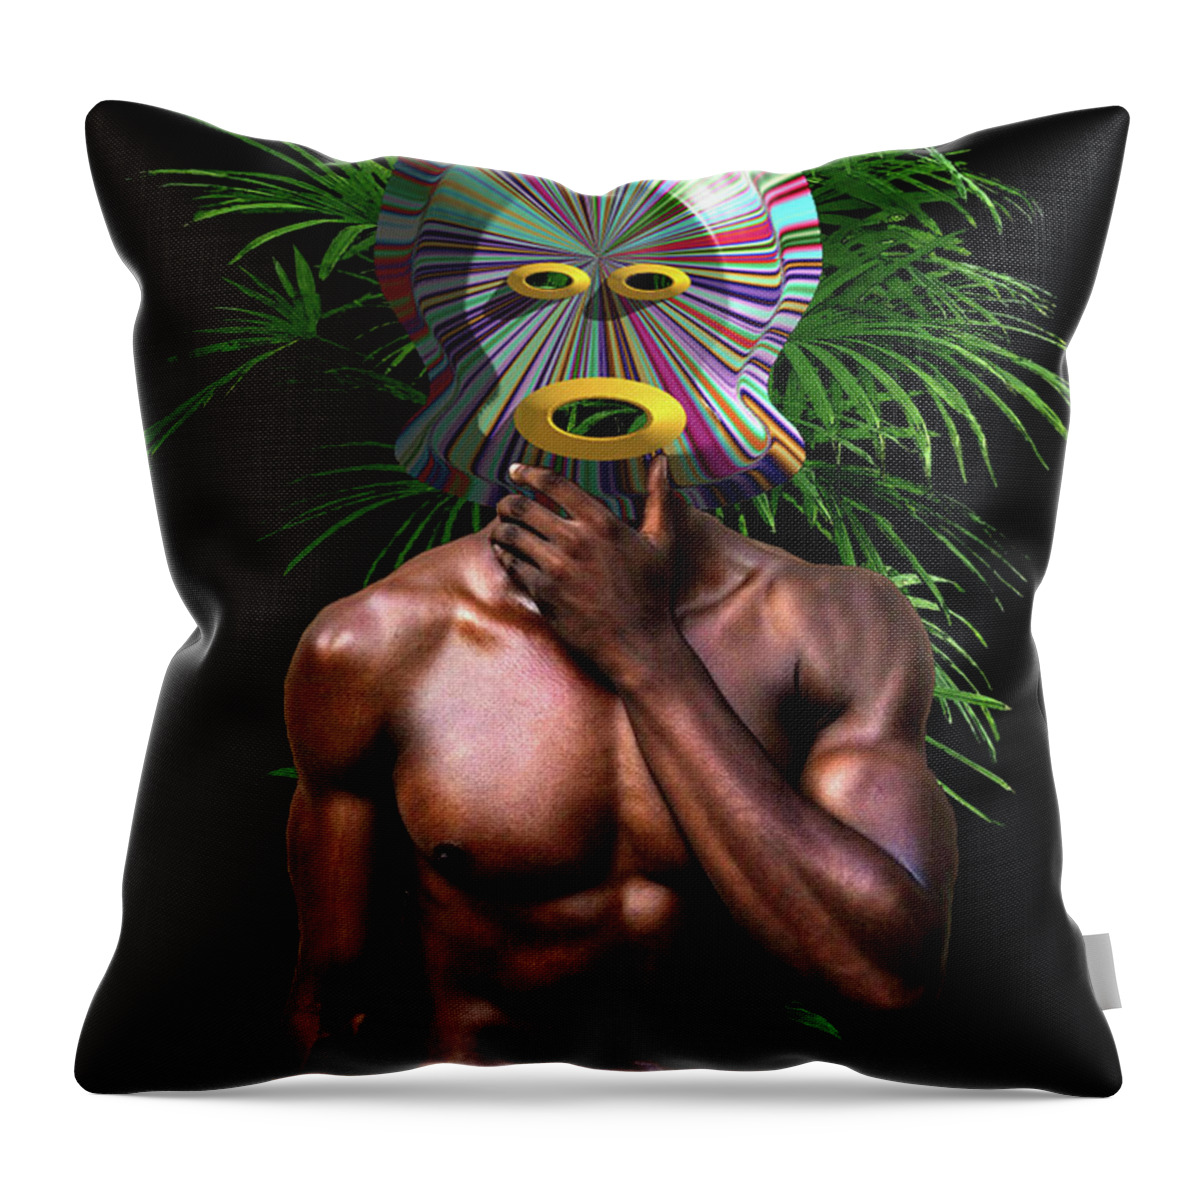 Masks Throw Pillow featuring the digital art African Masked Man by Walter Neal